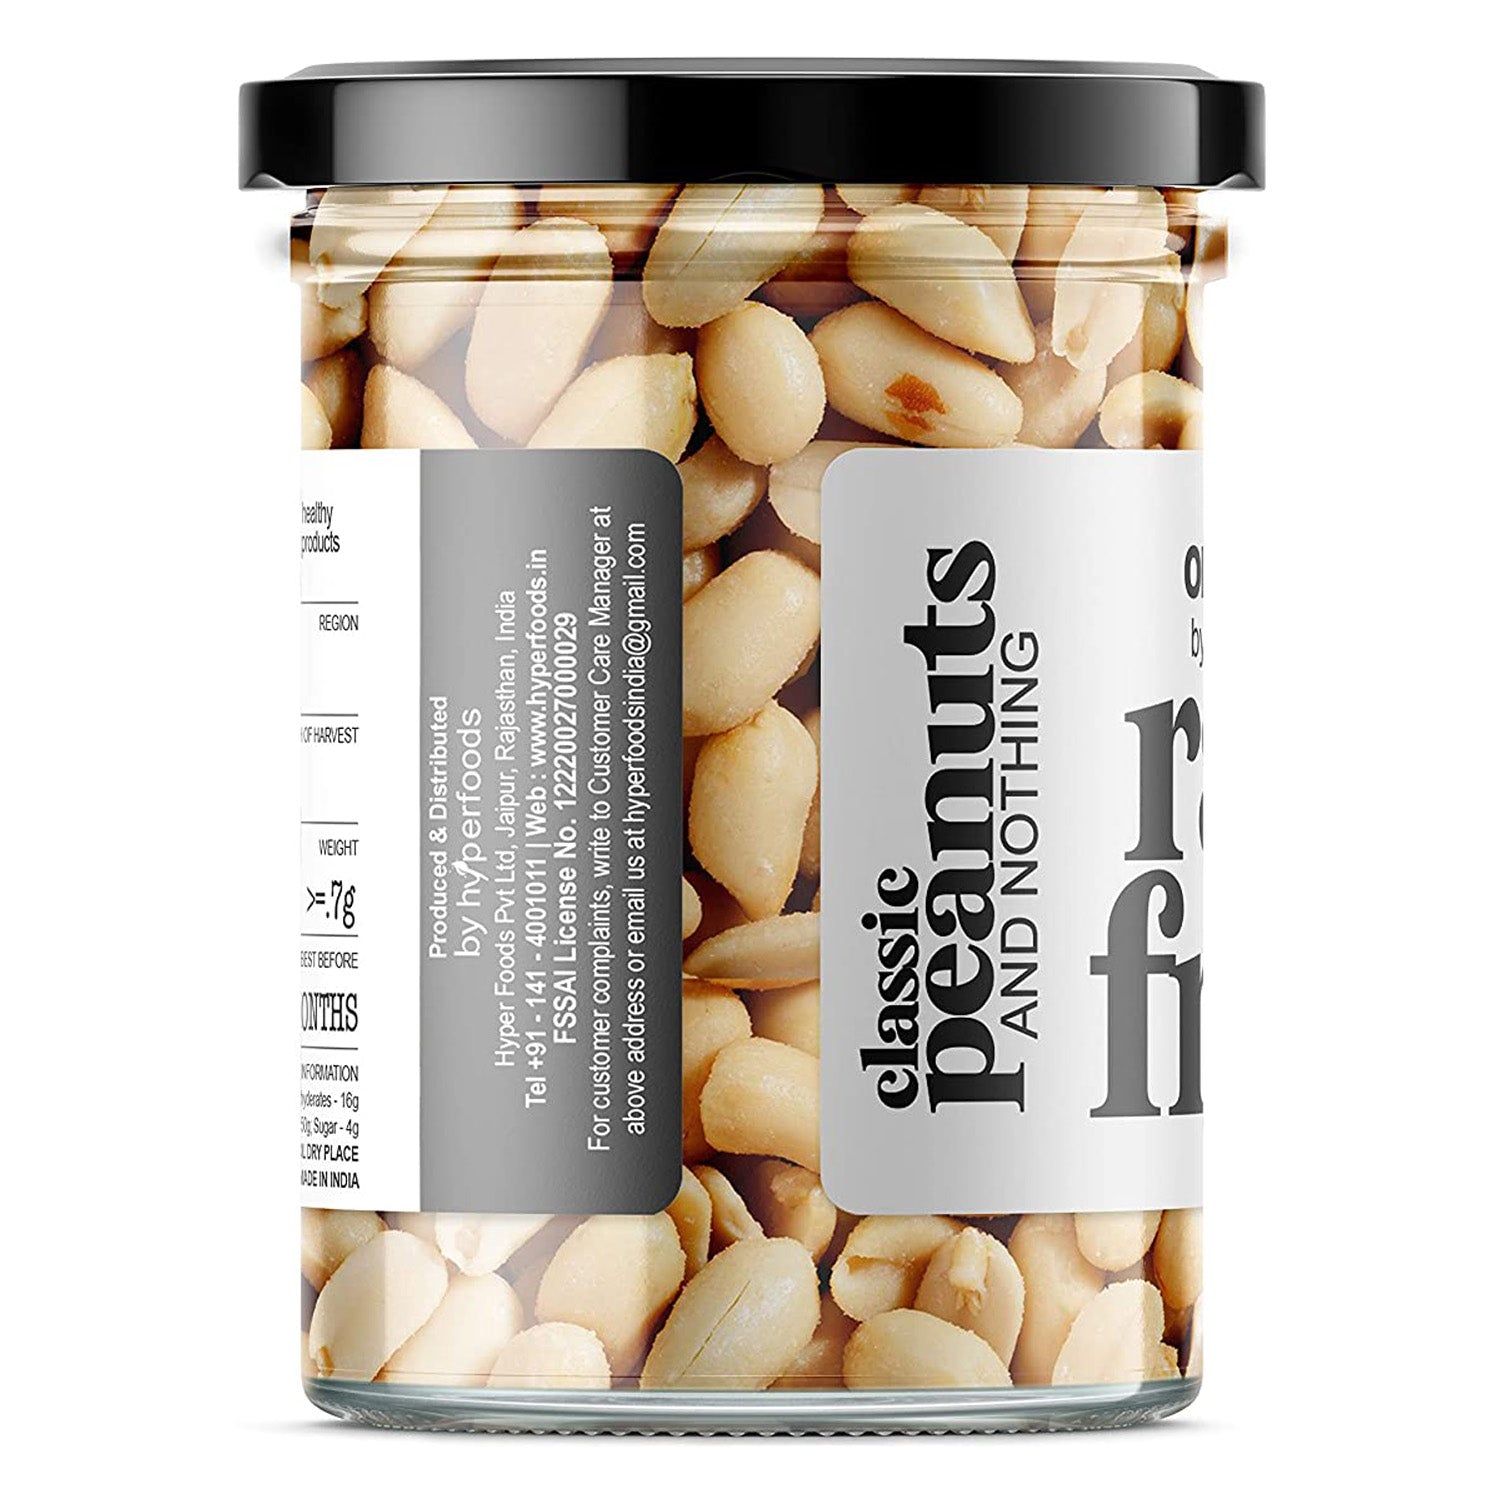 Peanuts Roasted - HyperFoods.in